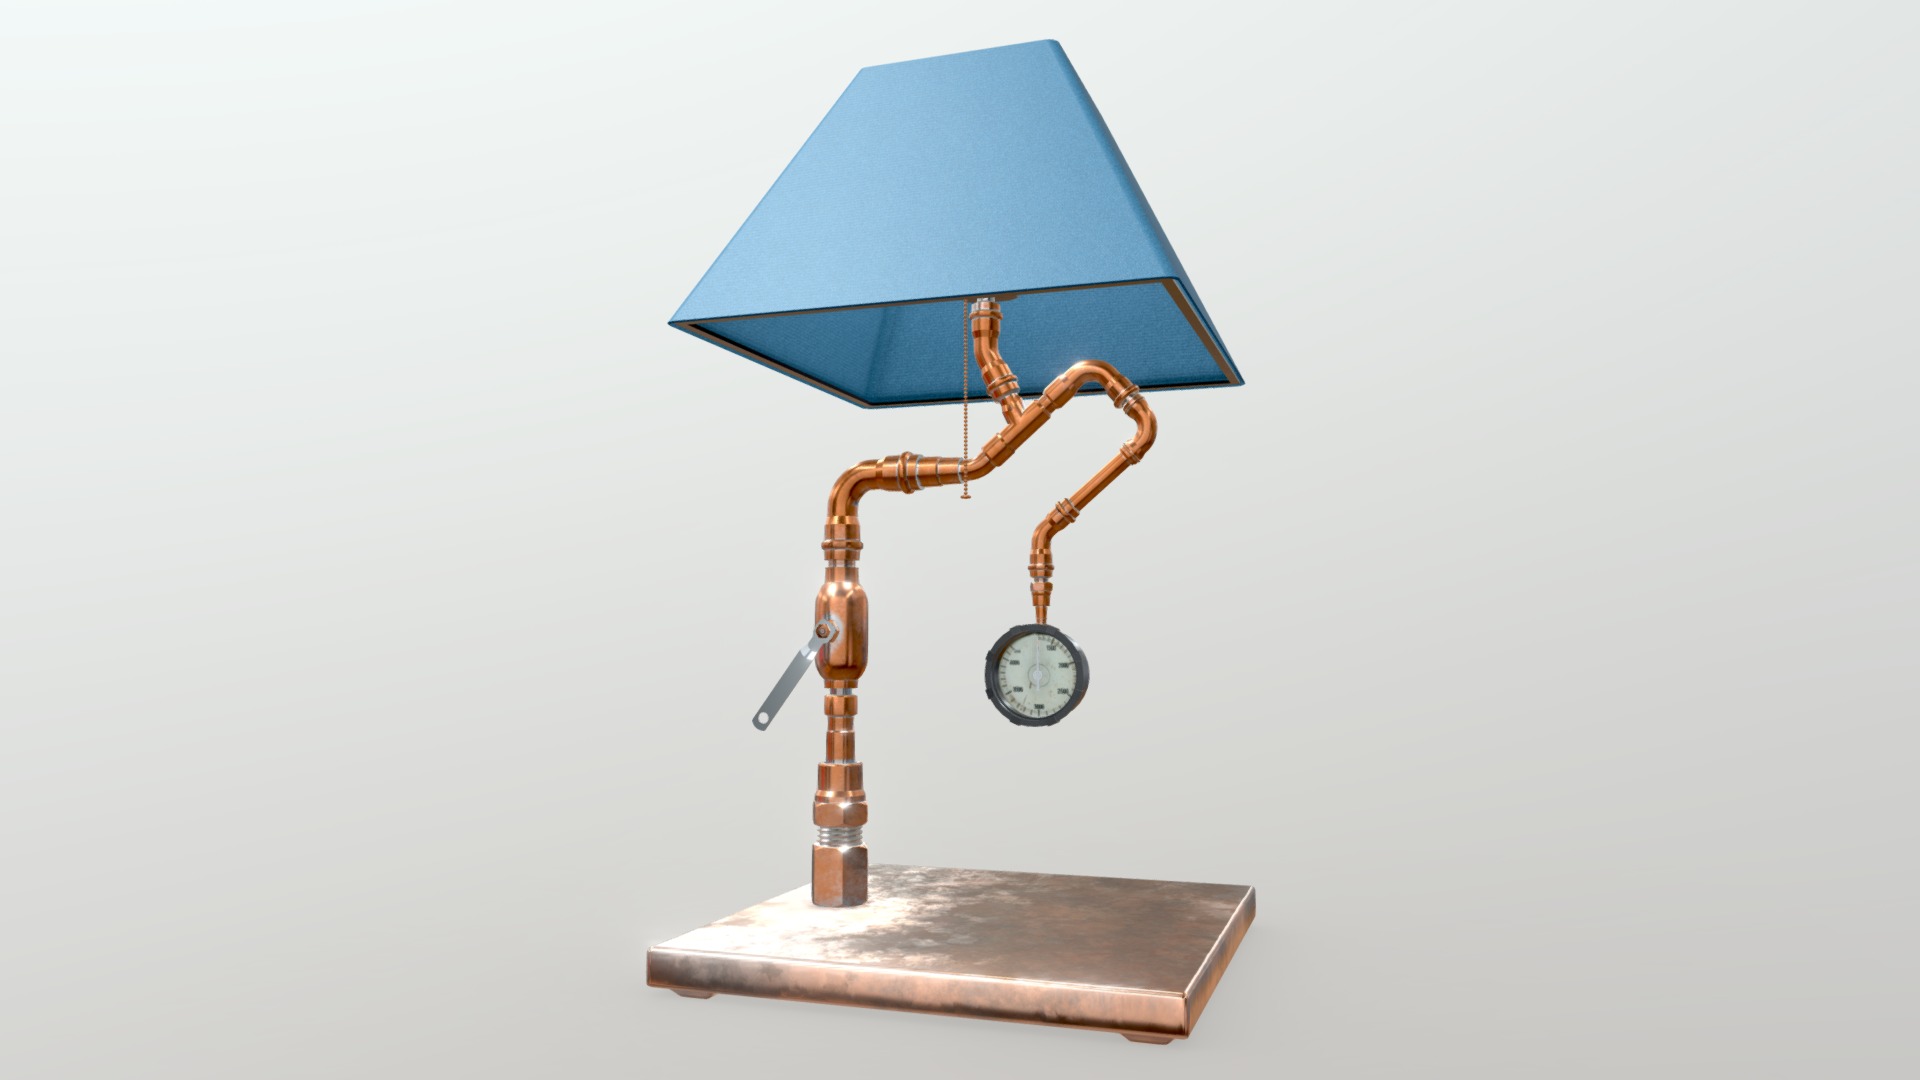 3D model Steam Table Lamp - This is a 3D model of the Steam Table Lamp. The 3D model is about a clock and a blue umbrella.